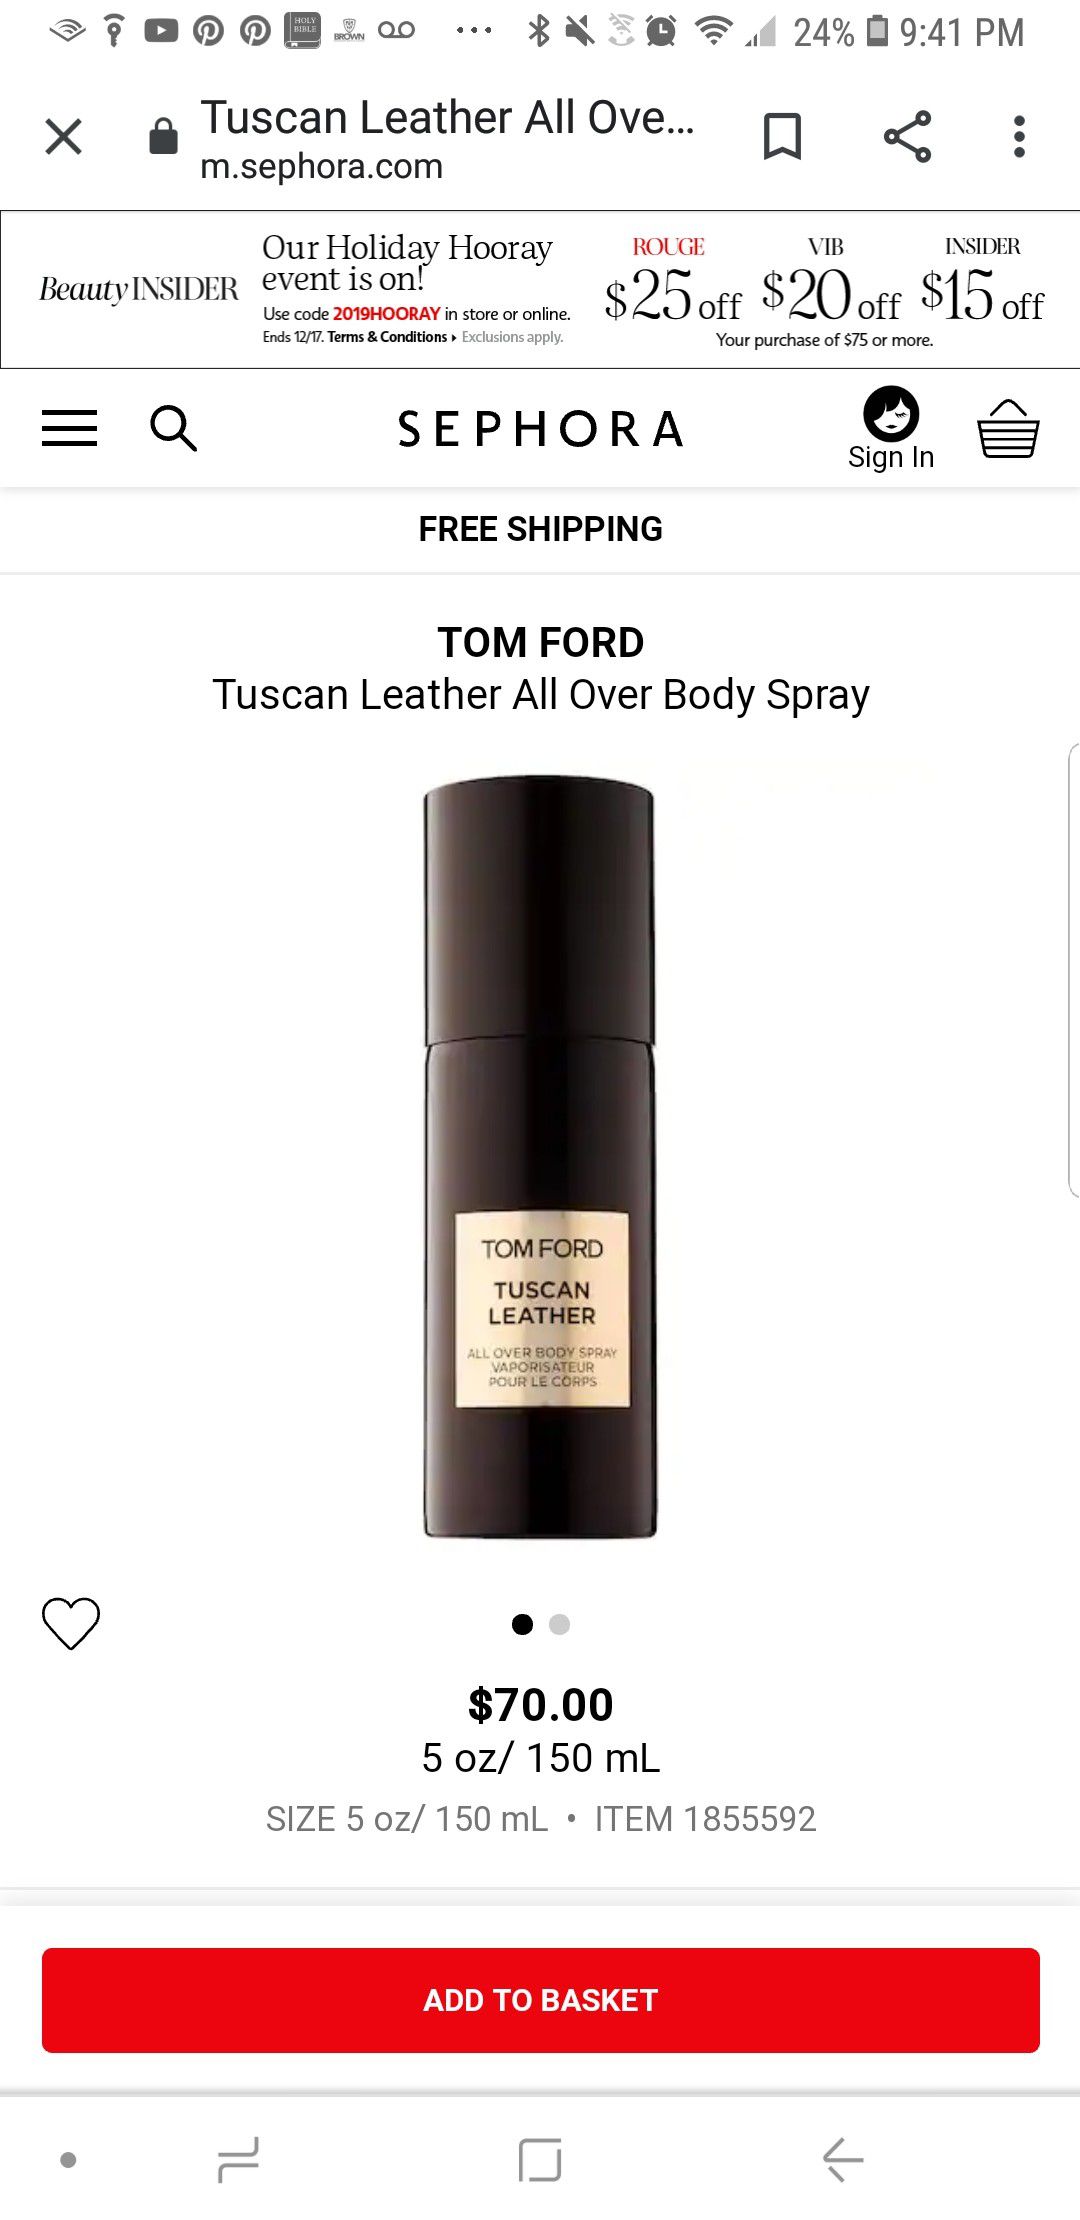 New Tom Ford Tuscan Leather Body Spray